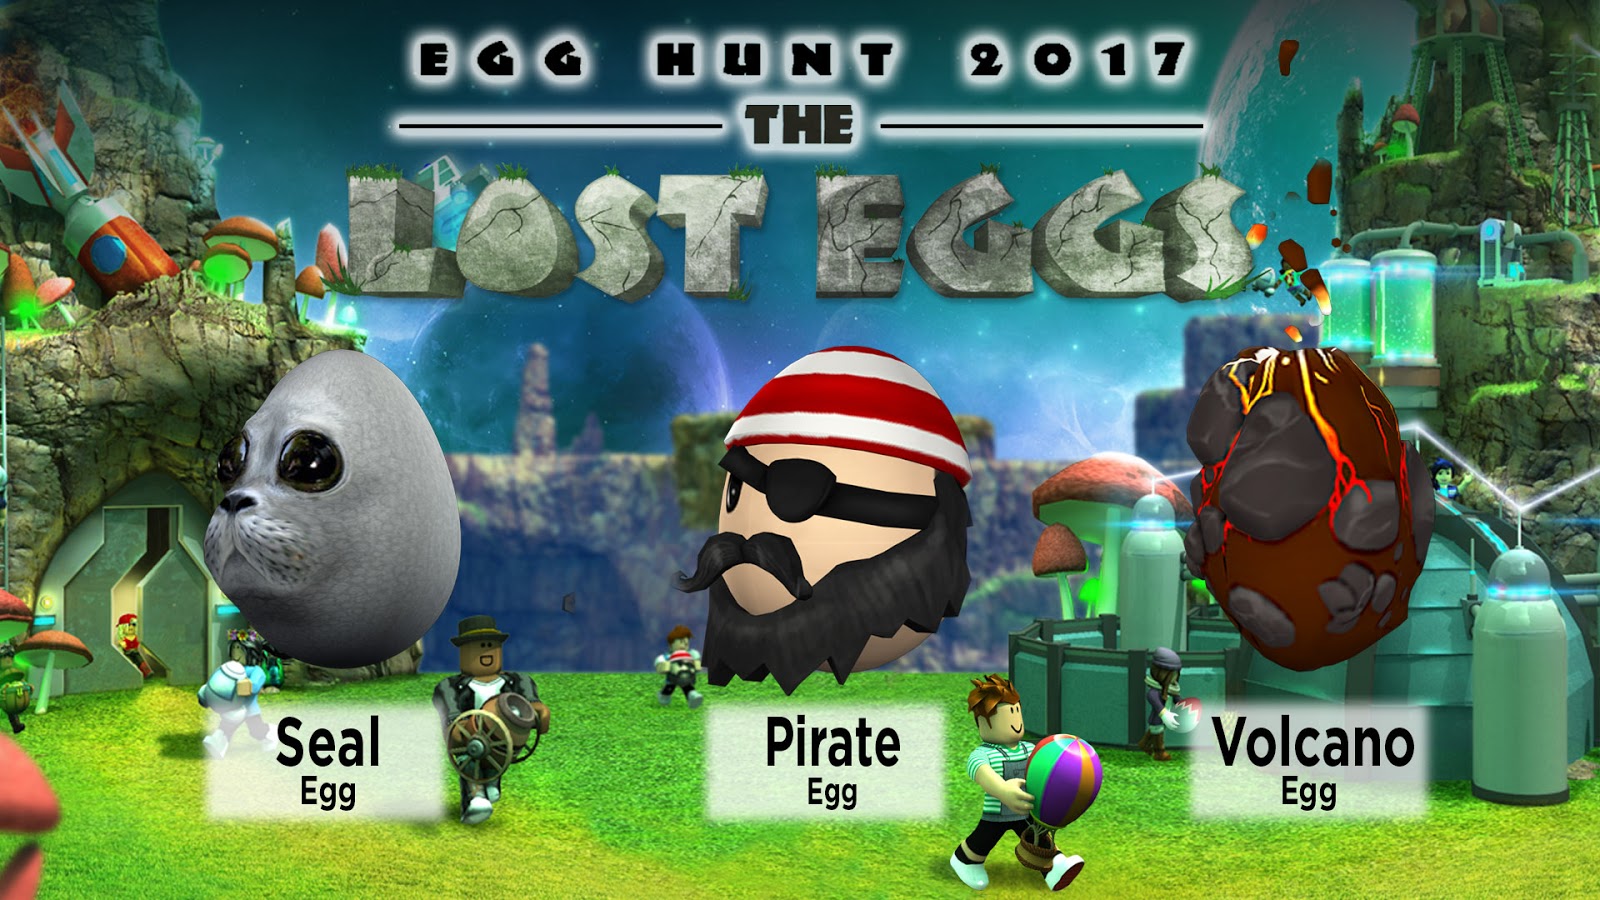 Giveaway Roblox Egg Hunt Prize Pack Mommy Katie - roblox game play with builder man character glow in the dark